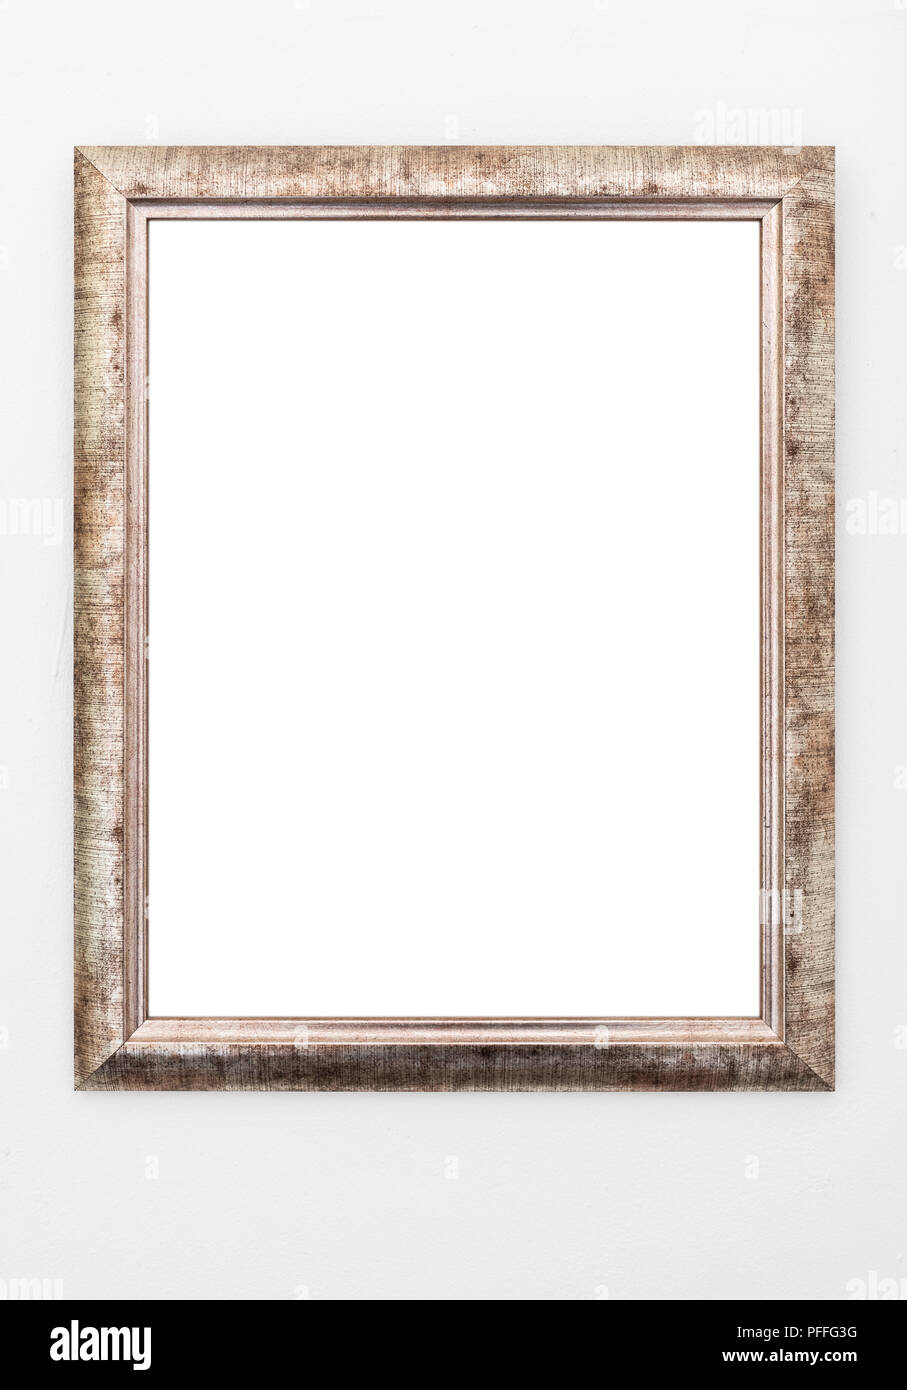 empty ornate picture frame hanging on wall Stock Photo